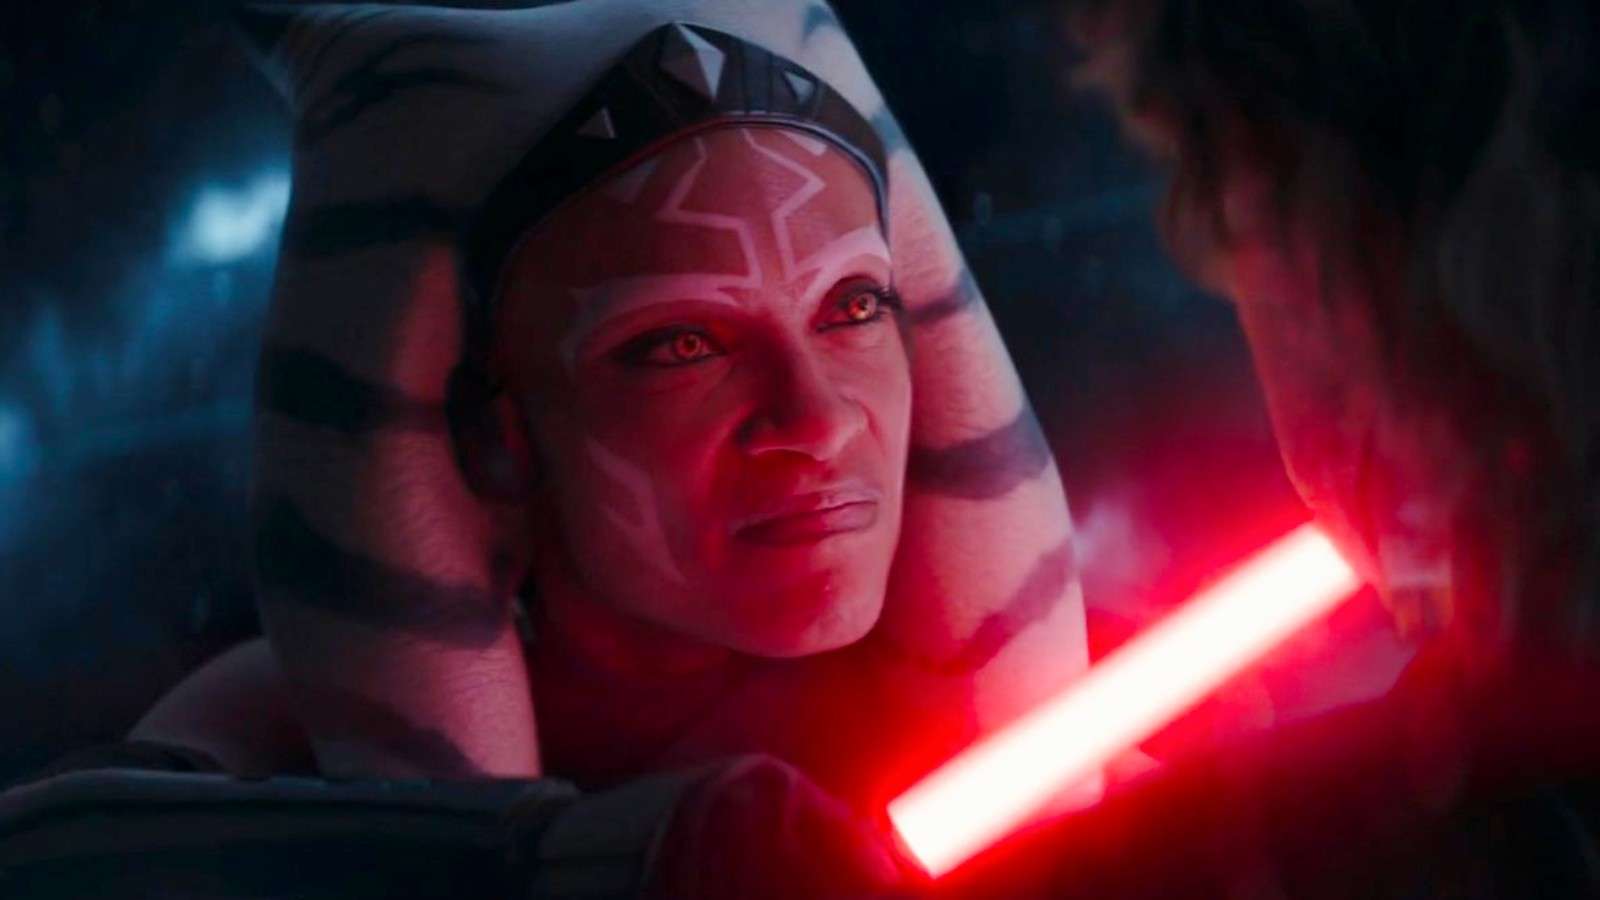 Ahsoka with Sith eyes in Episode 5